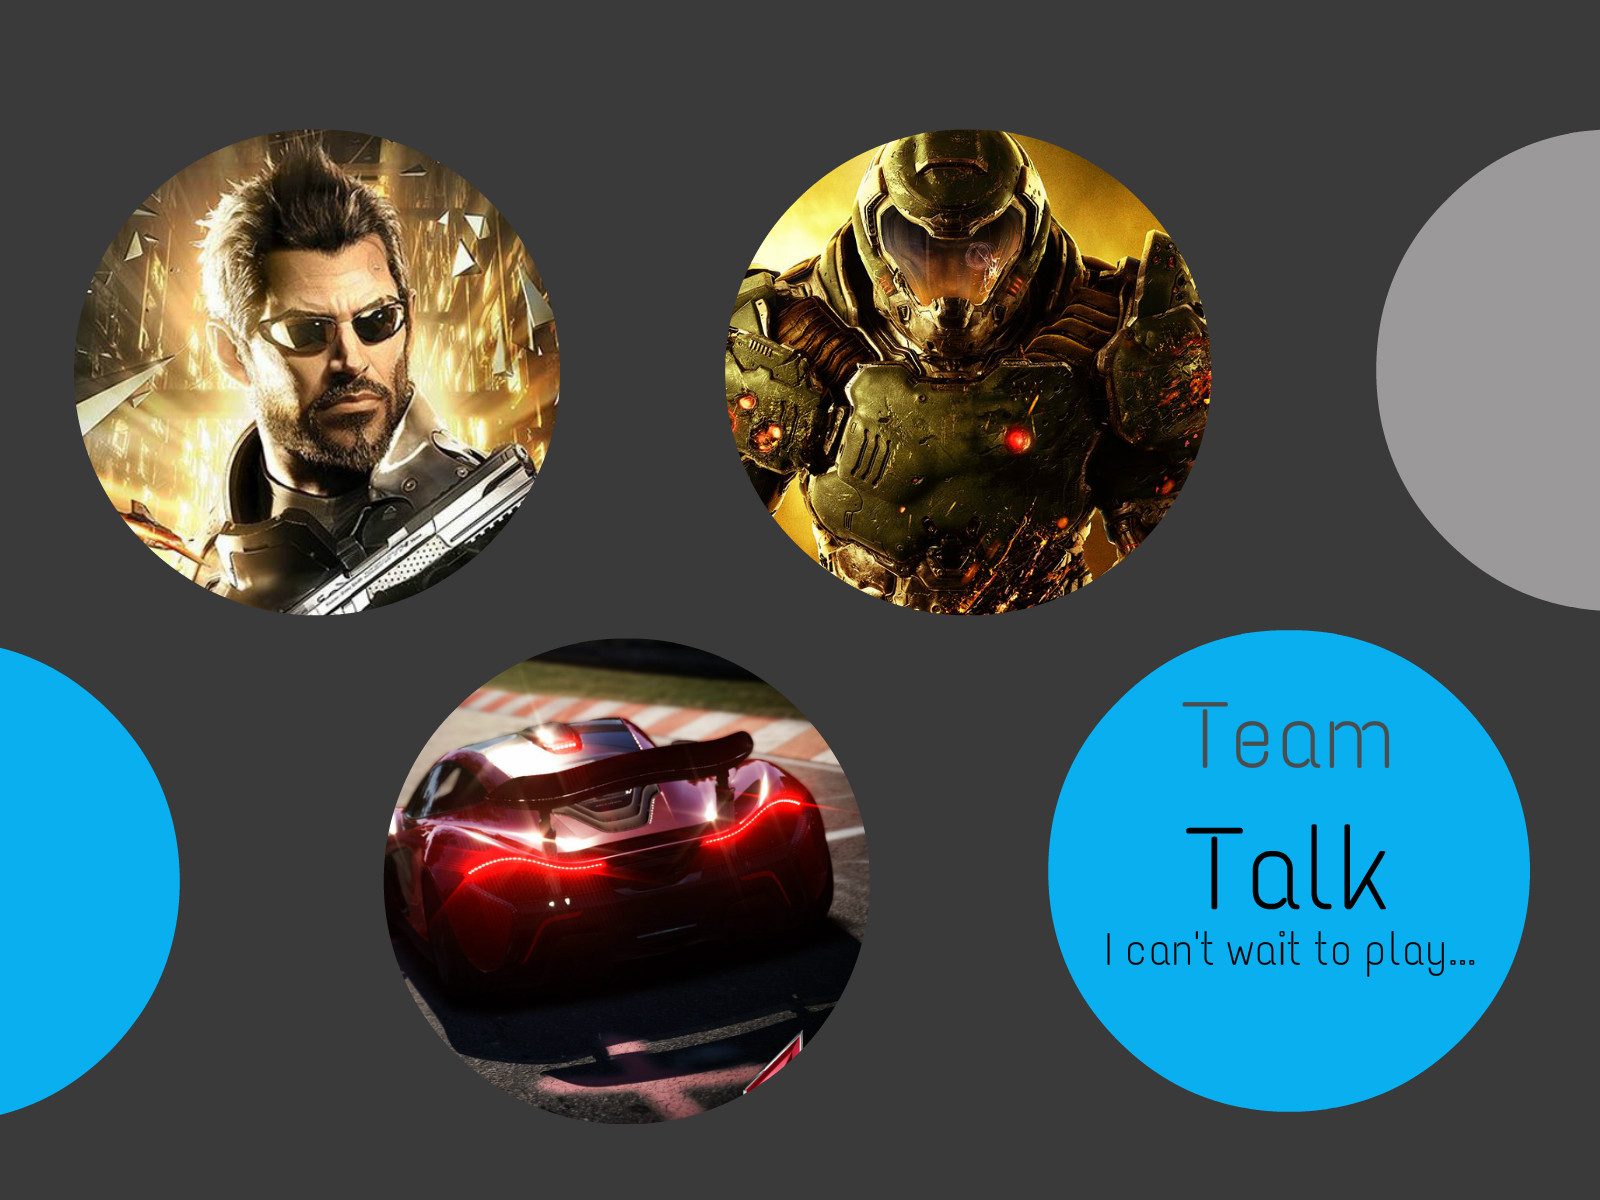 Team Talk: Games we can’t wait for